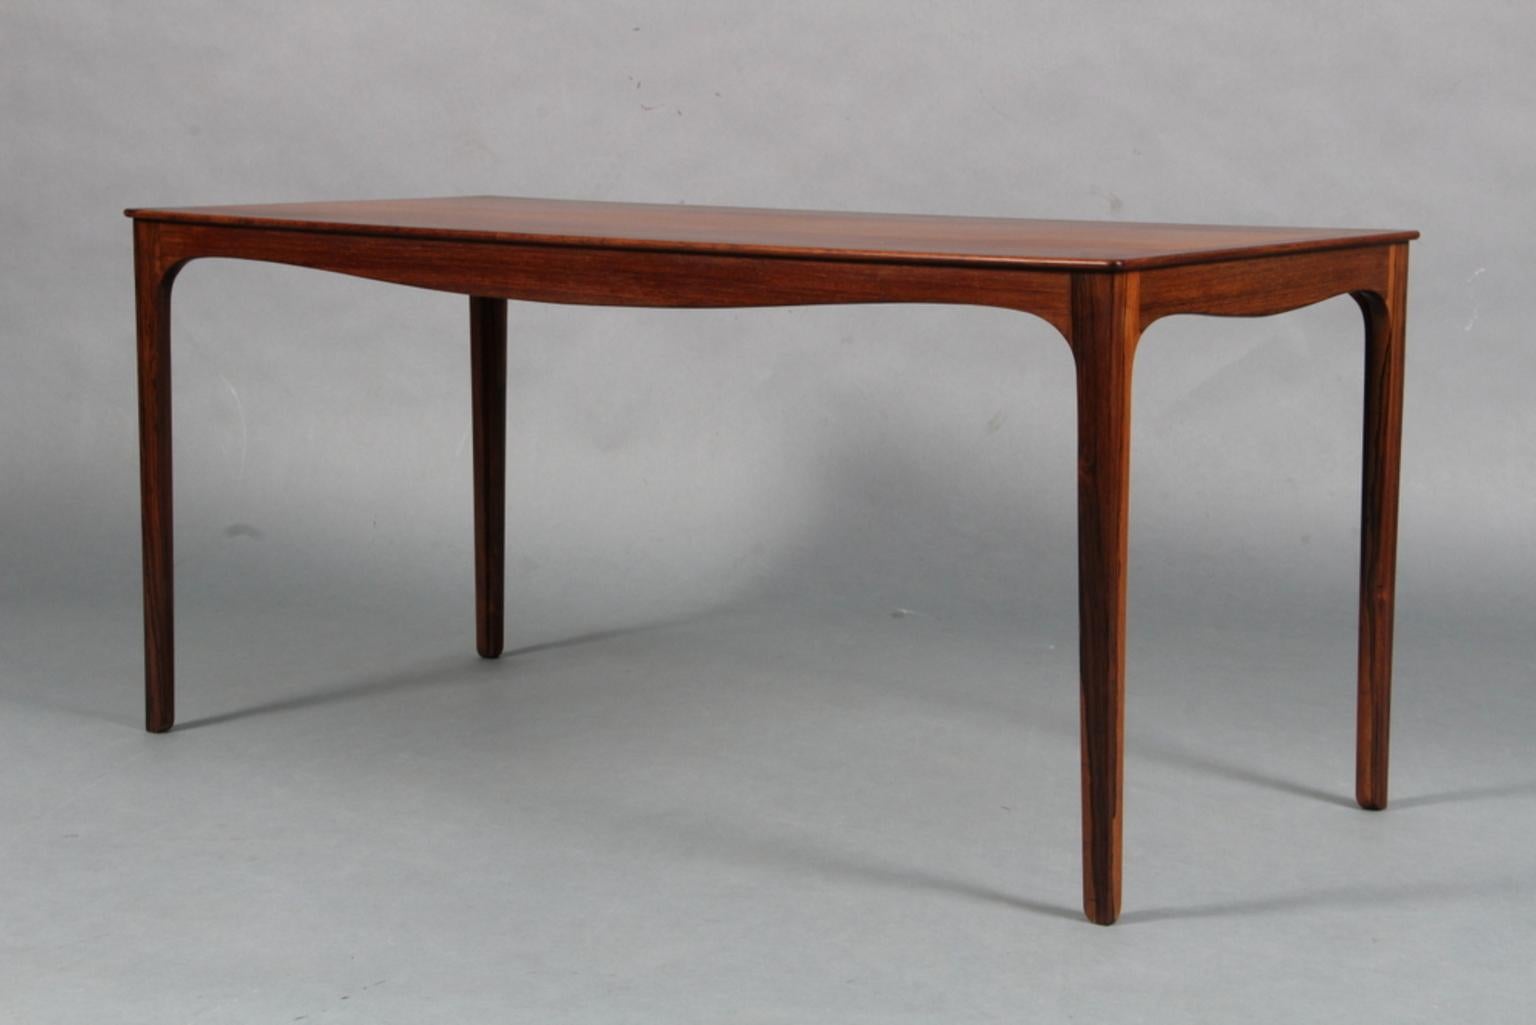 Danish Ole Wanscher Coffee Table in Rosewood, Made by A. J. Iversen